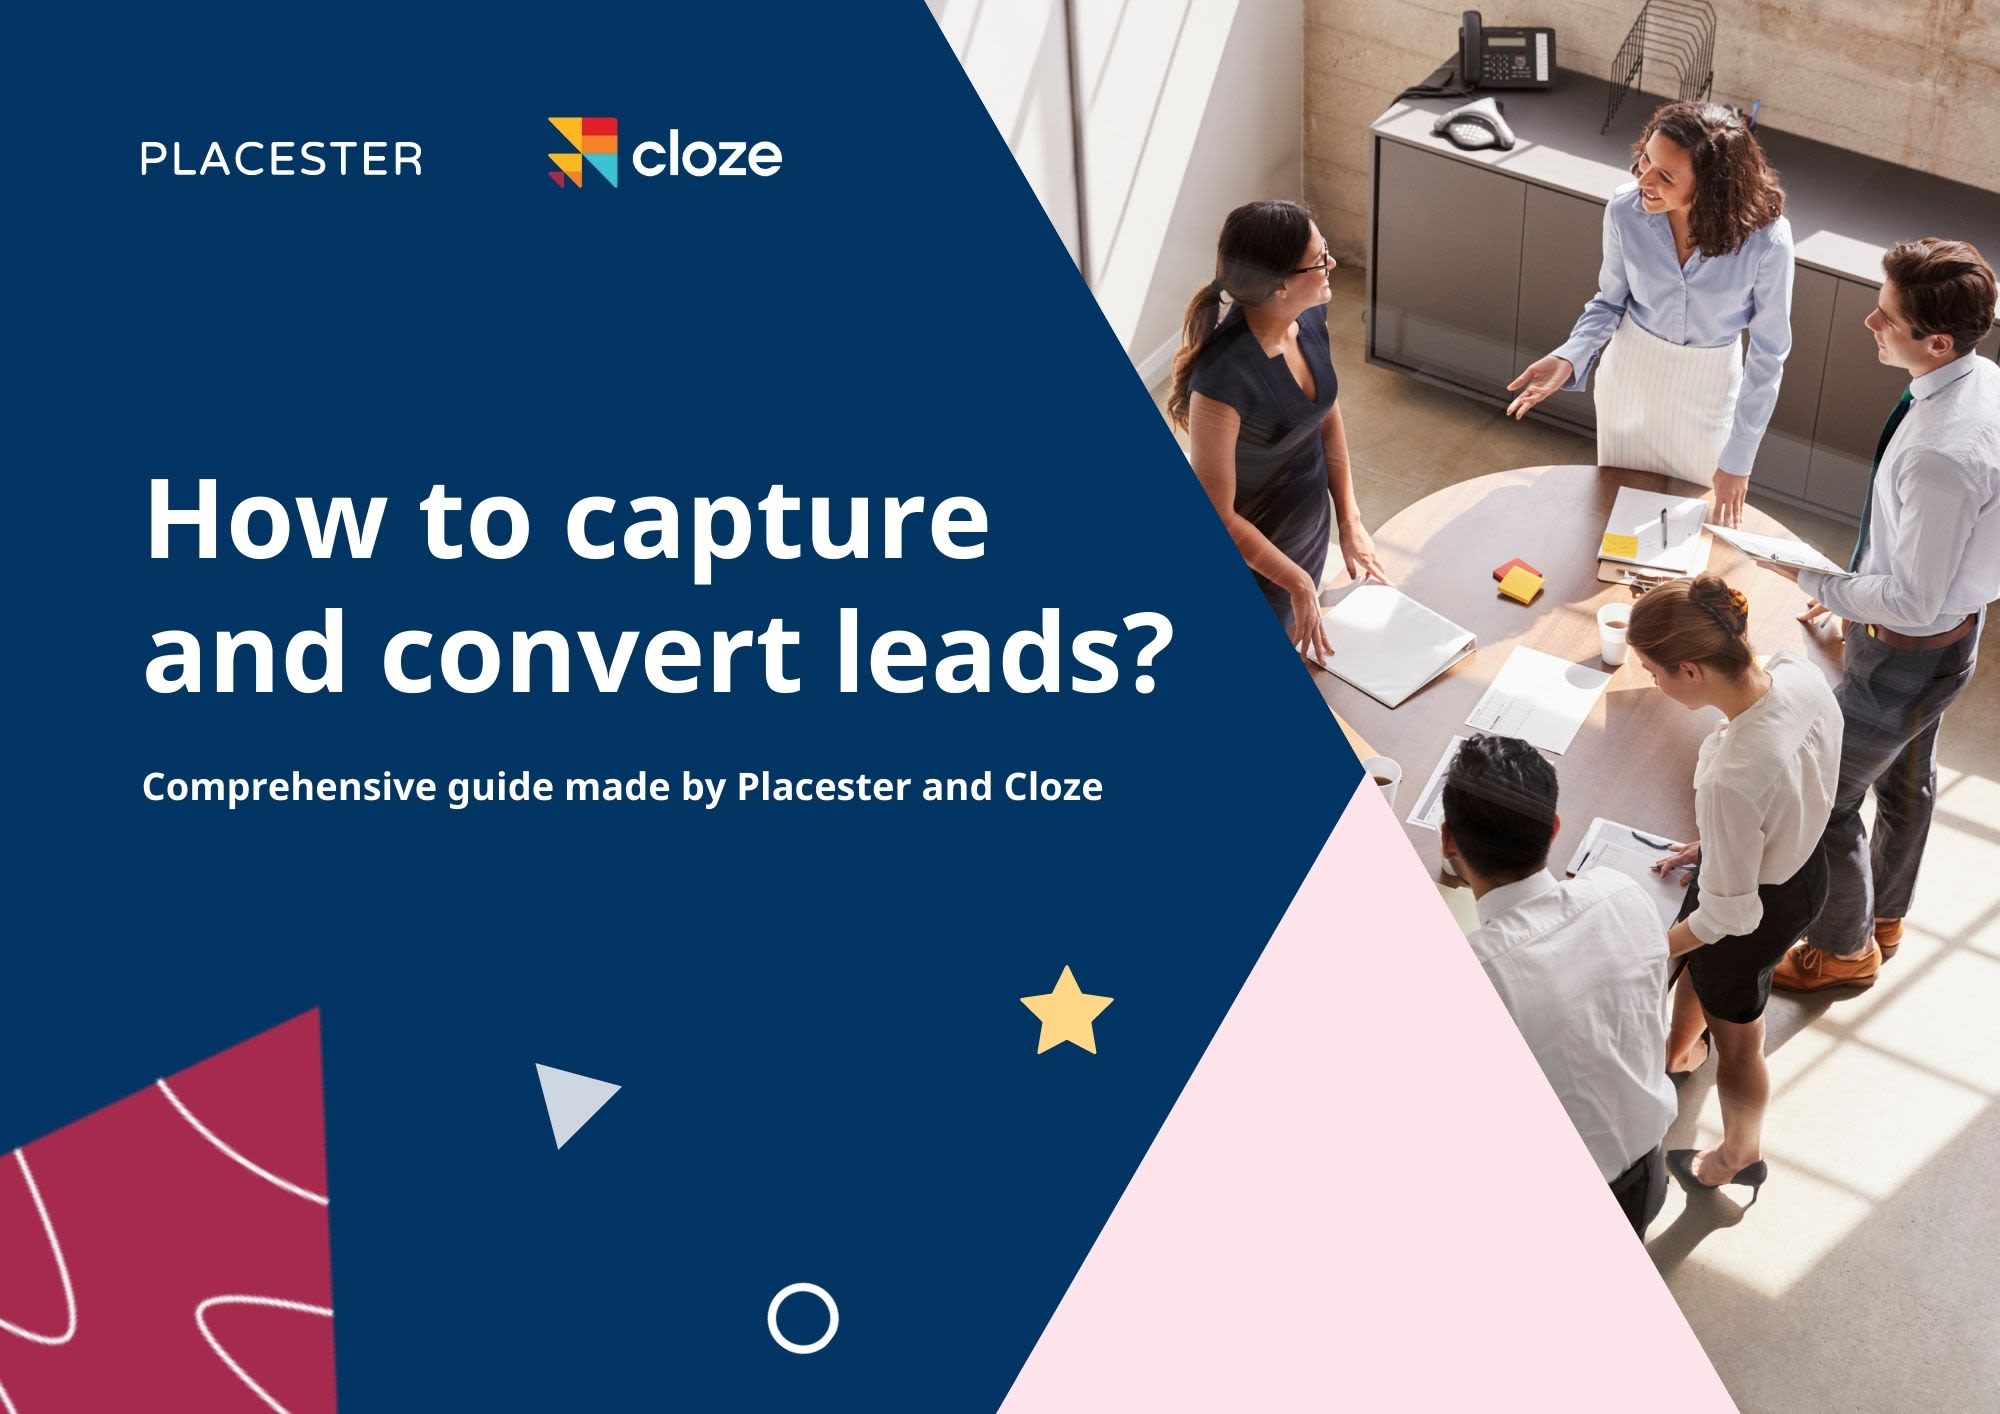 The Comprehensive Guide to Capturing and Converting Leads - Made by Placester and Cloze 